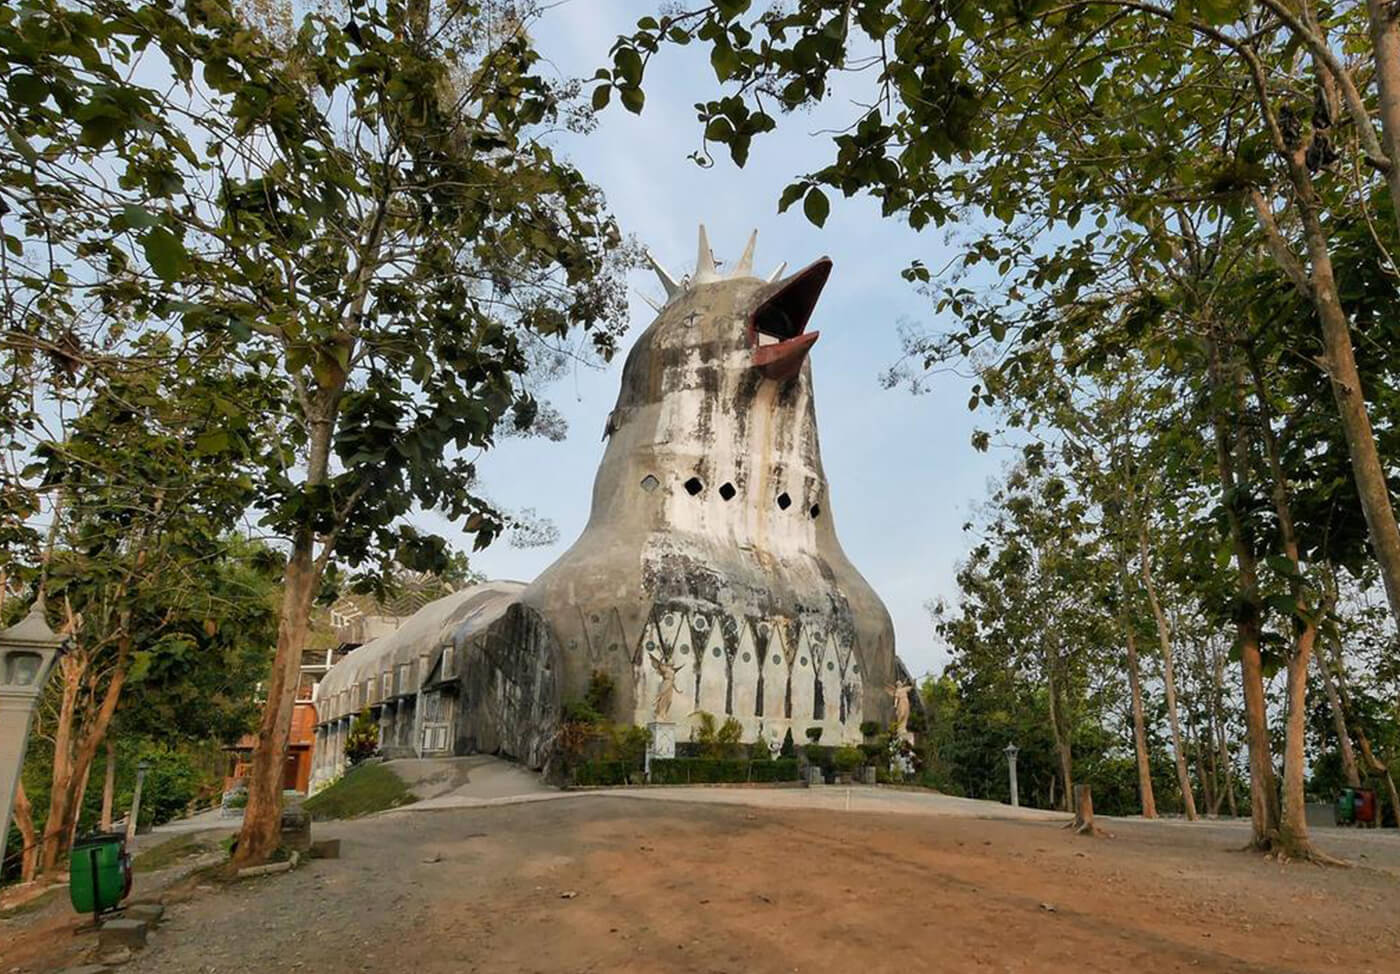 MyBestPlace - Gereja Ayam, the Mysterious Abandoned Chicken-Shaped Church